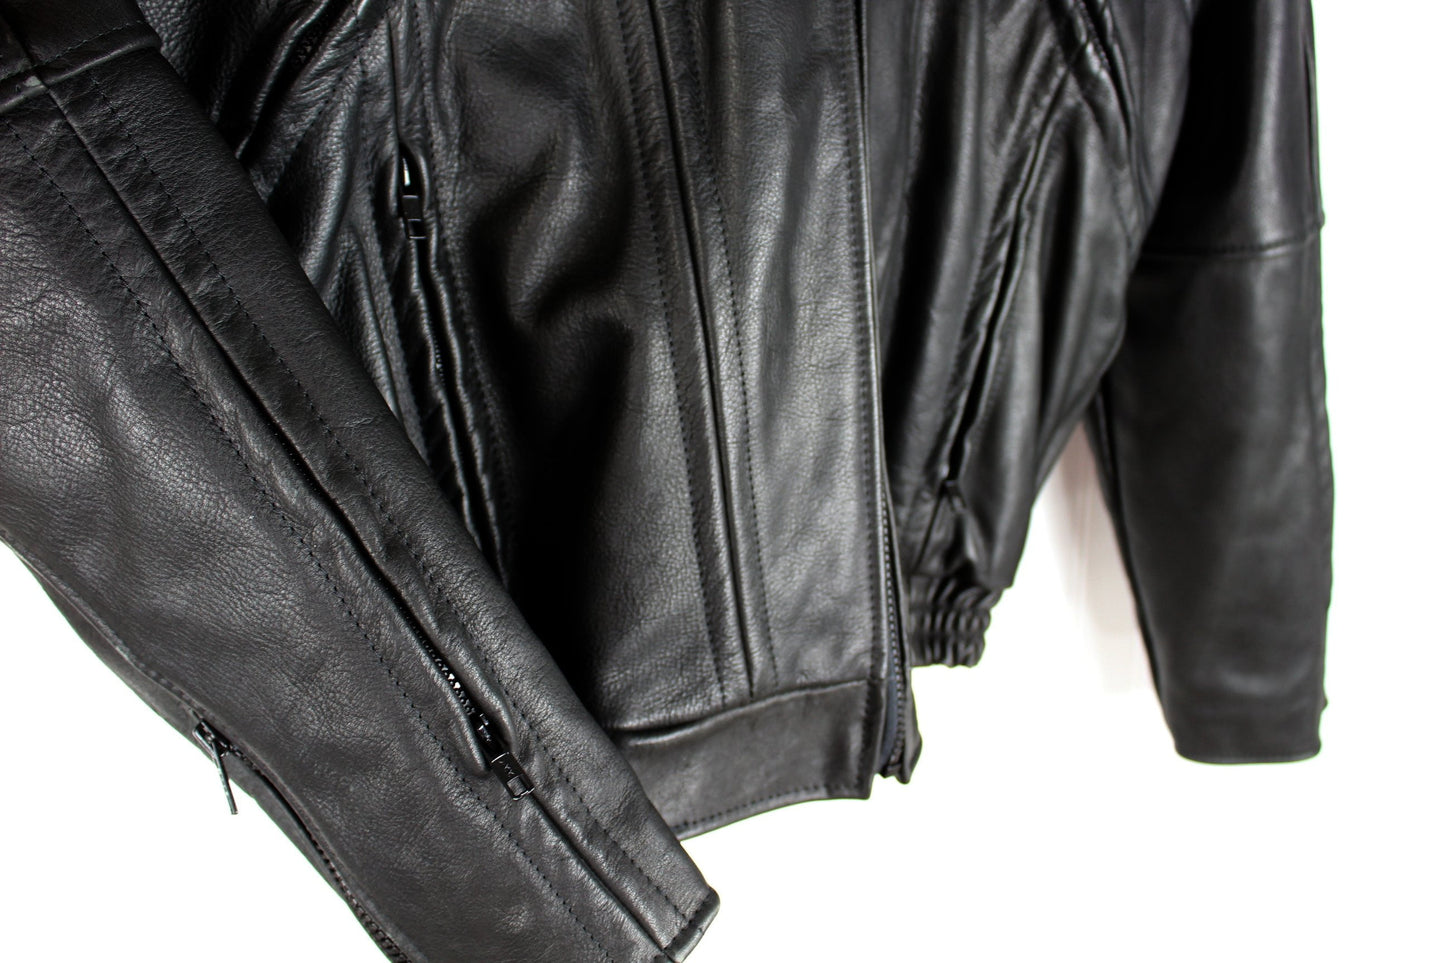 Protech USA Performance Leather Black Motorcycle Jacket M Vintage - Thinsulate Lining  great detail